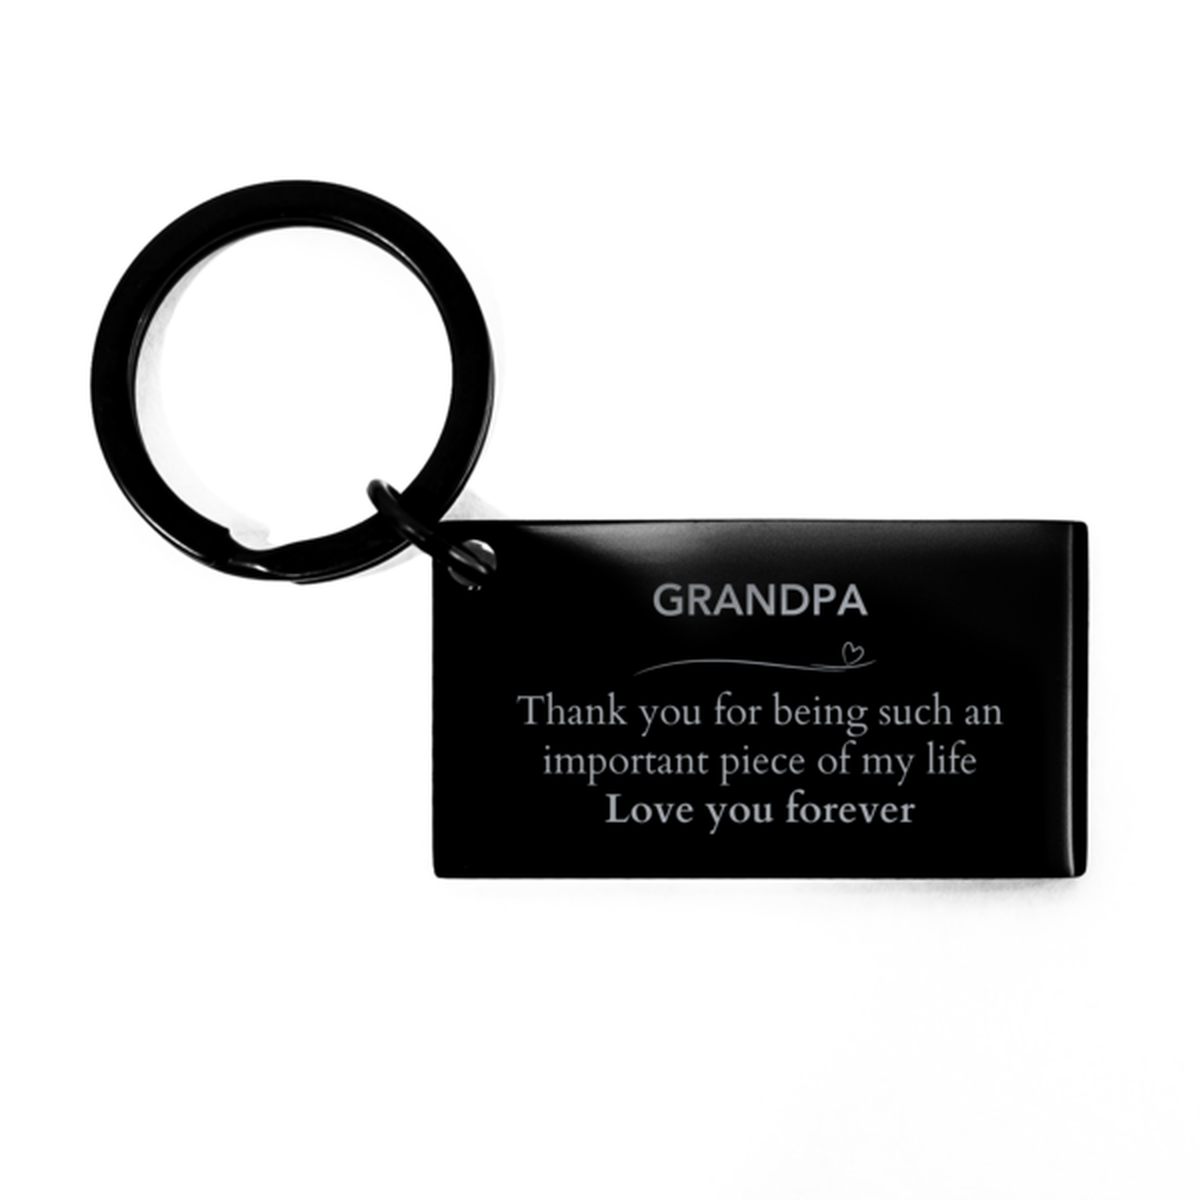 Appropriate Grandpa Keychain Epic Birthday Gifts for Grandpa Thank you for being such an important piece of my life Grandpa Christmas Mothers Fathers Day